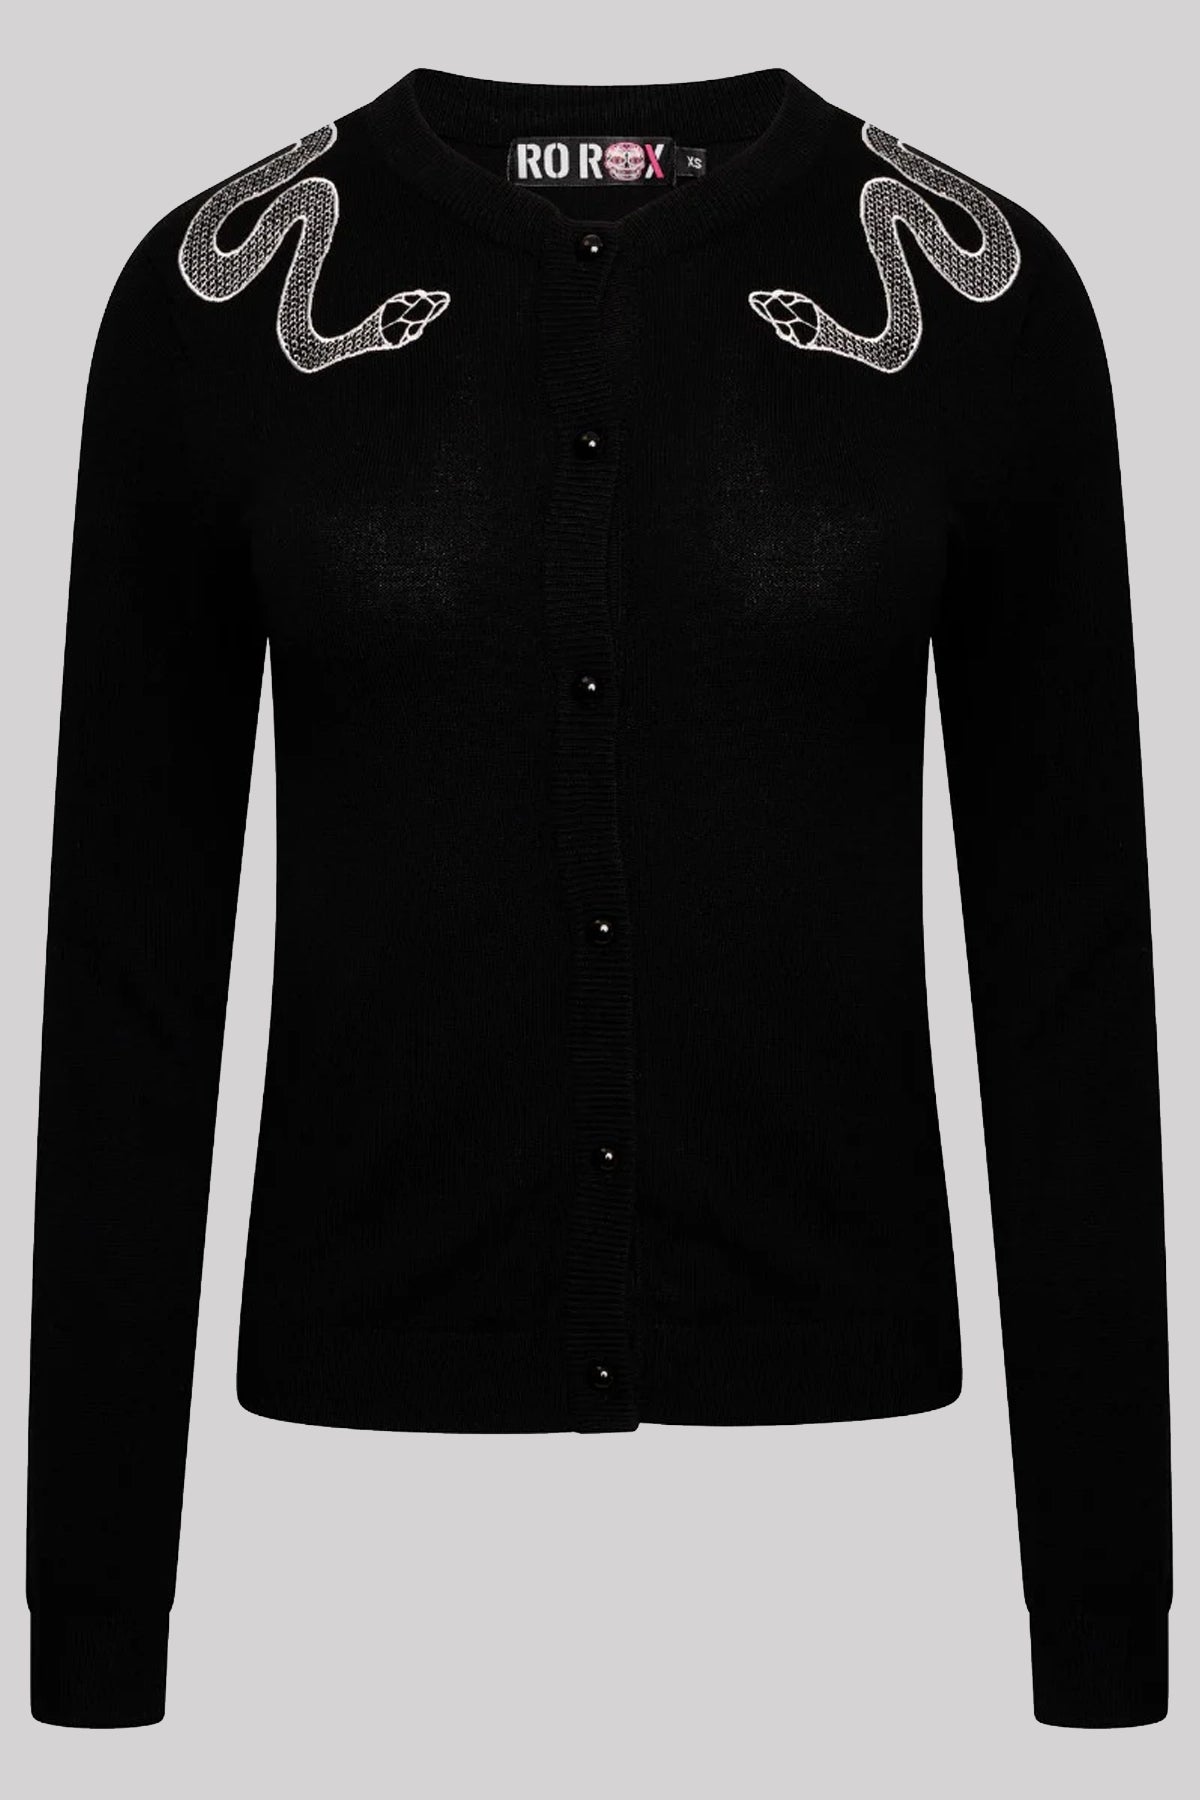 Ro Rox Snake Embroidery Gothic Knitted Long Sleeve Cardigan